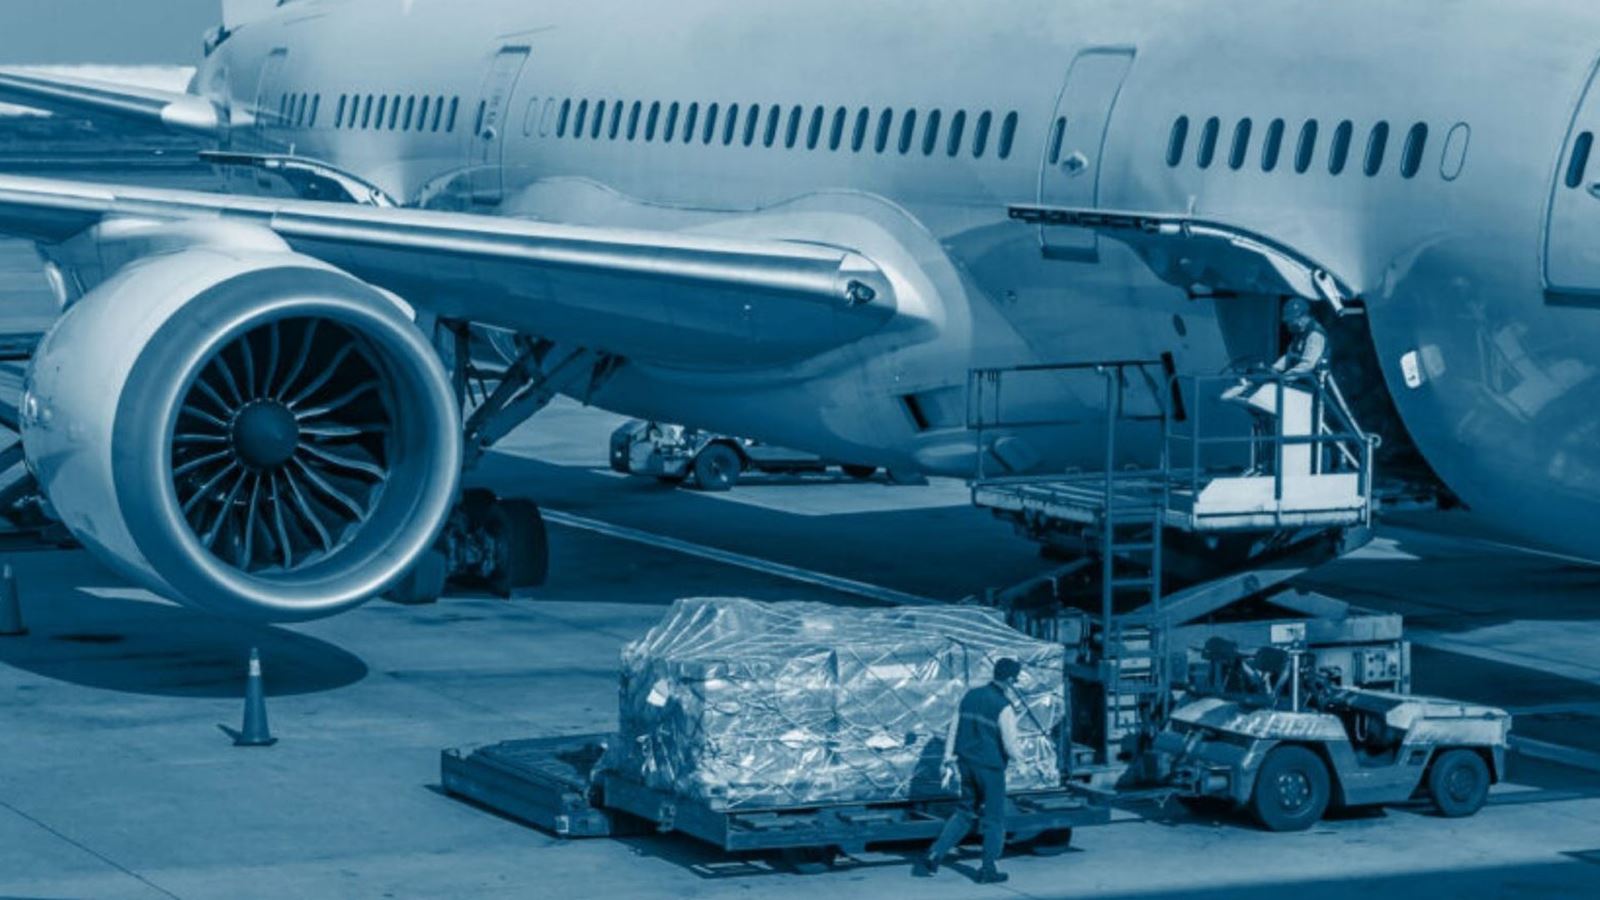 ACI World launches new guidance on developing cargo operations at airports